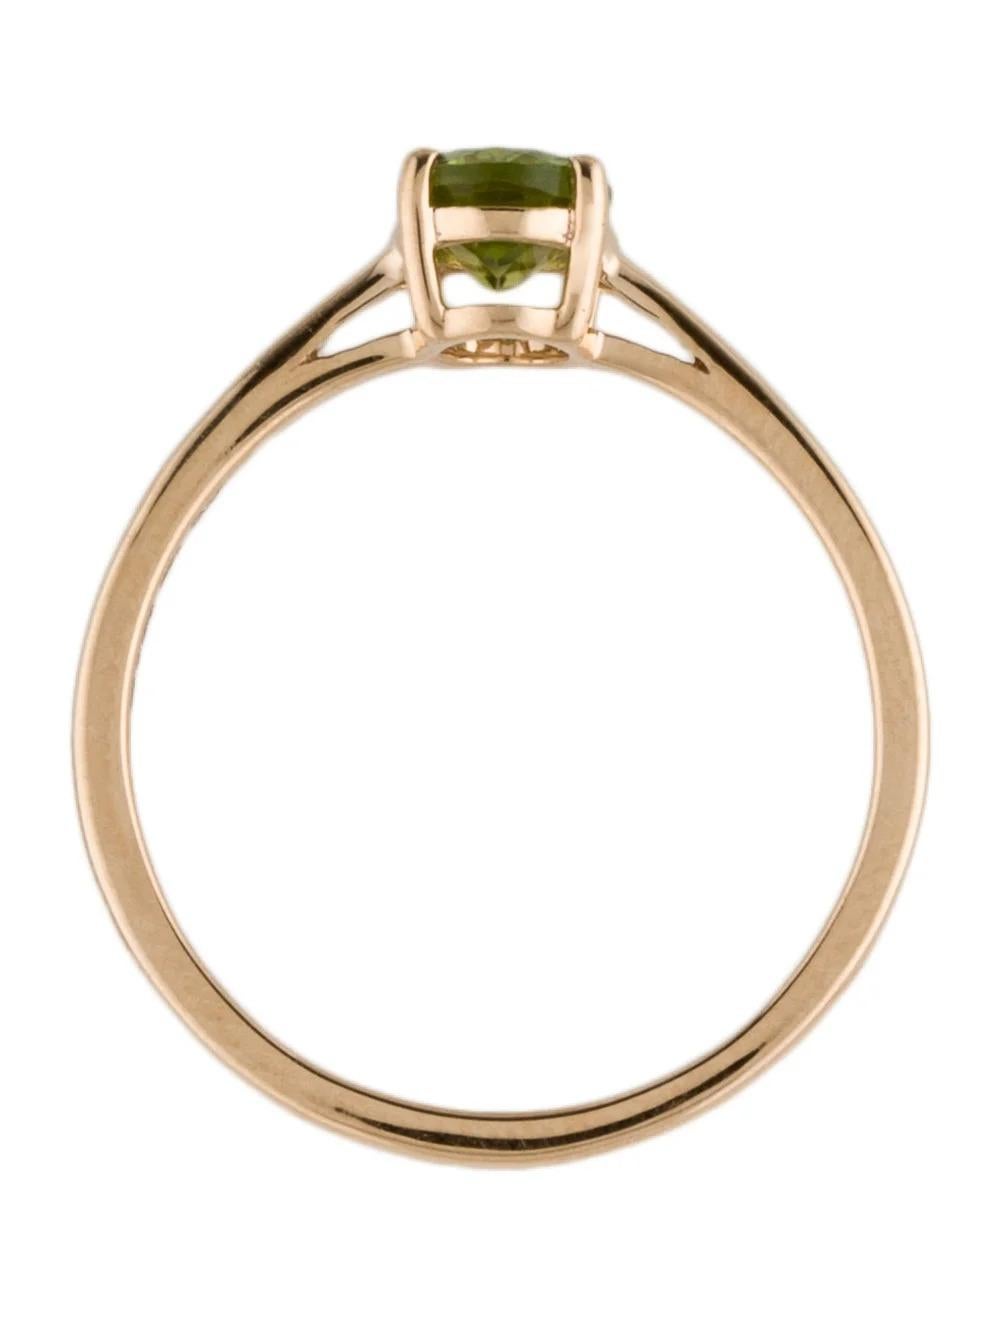 Women's Exquisite 14K Peridot Cocktail Ring Size 6.75 - Timeless Statement Jewelry For Sale